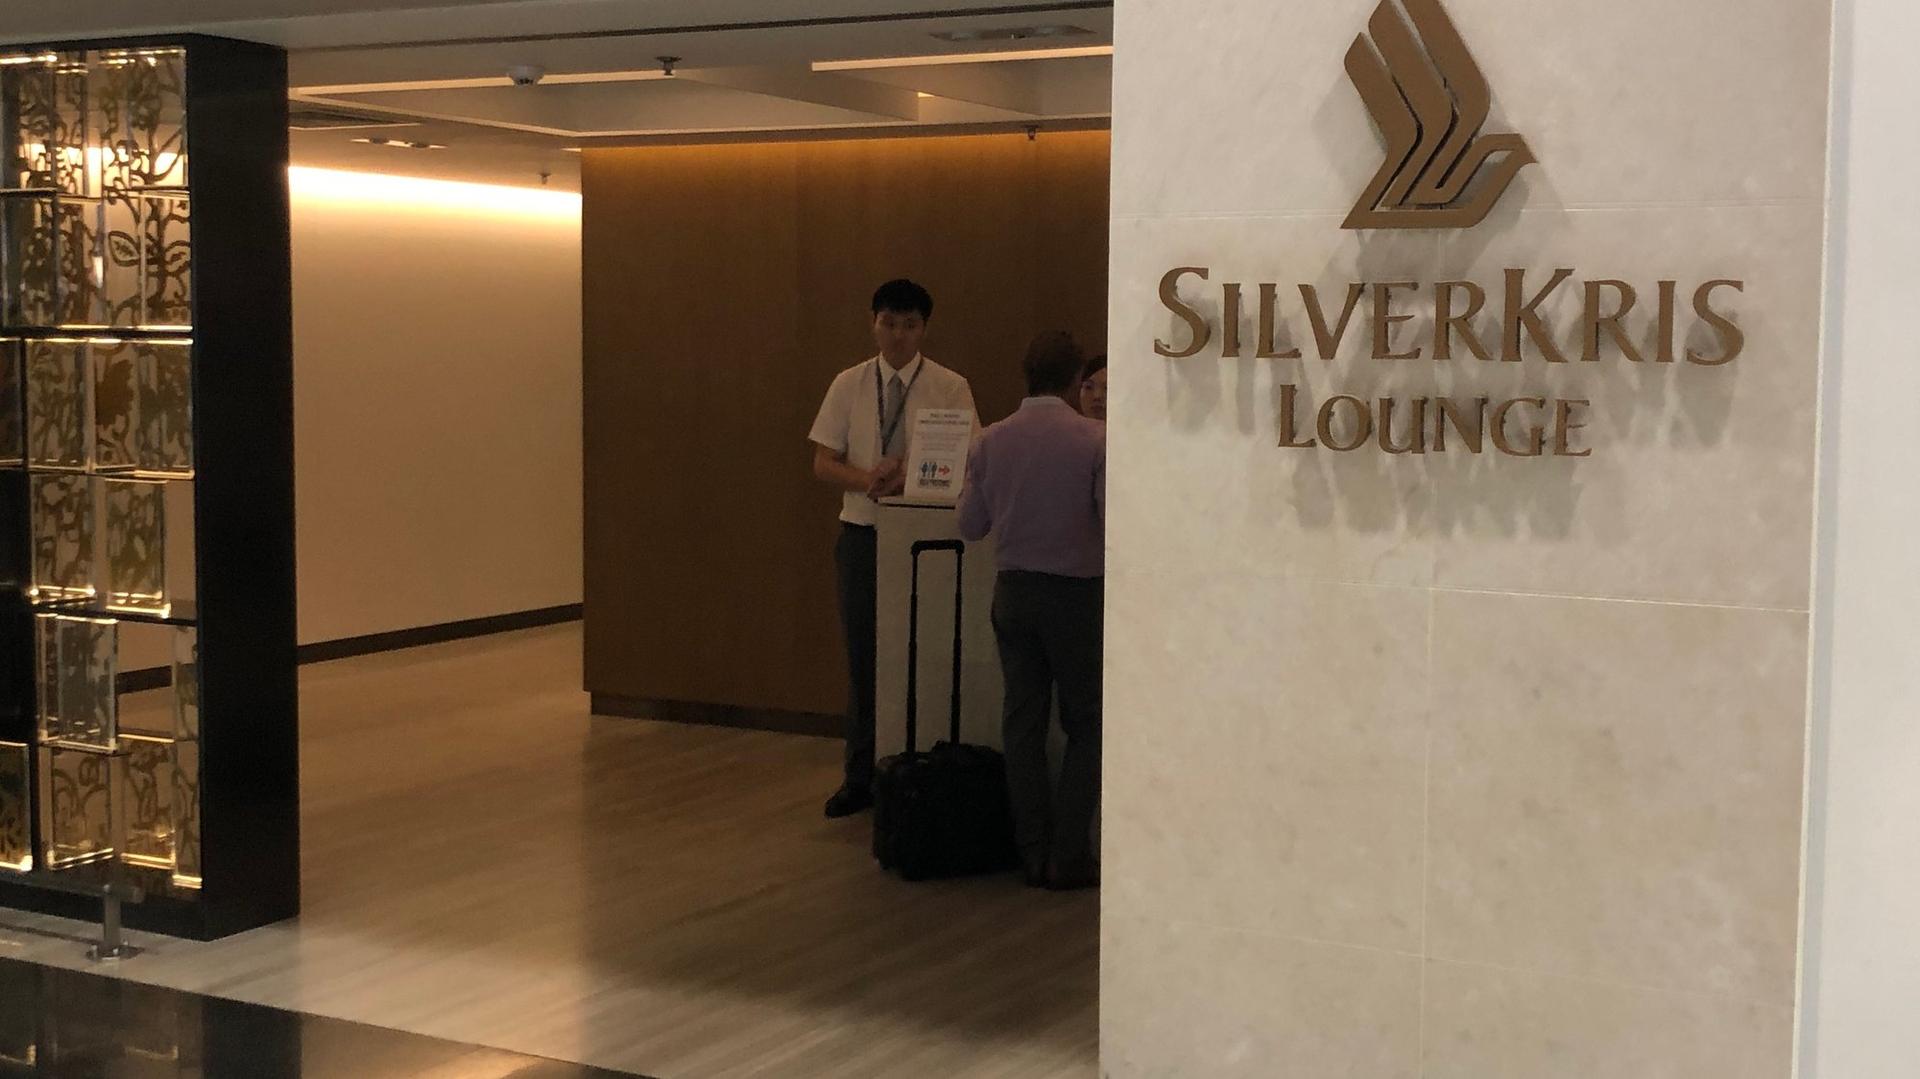 Singapore Airlines SilverKris Business Class Lounge image 43 of 68